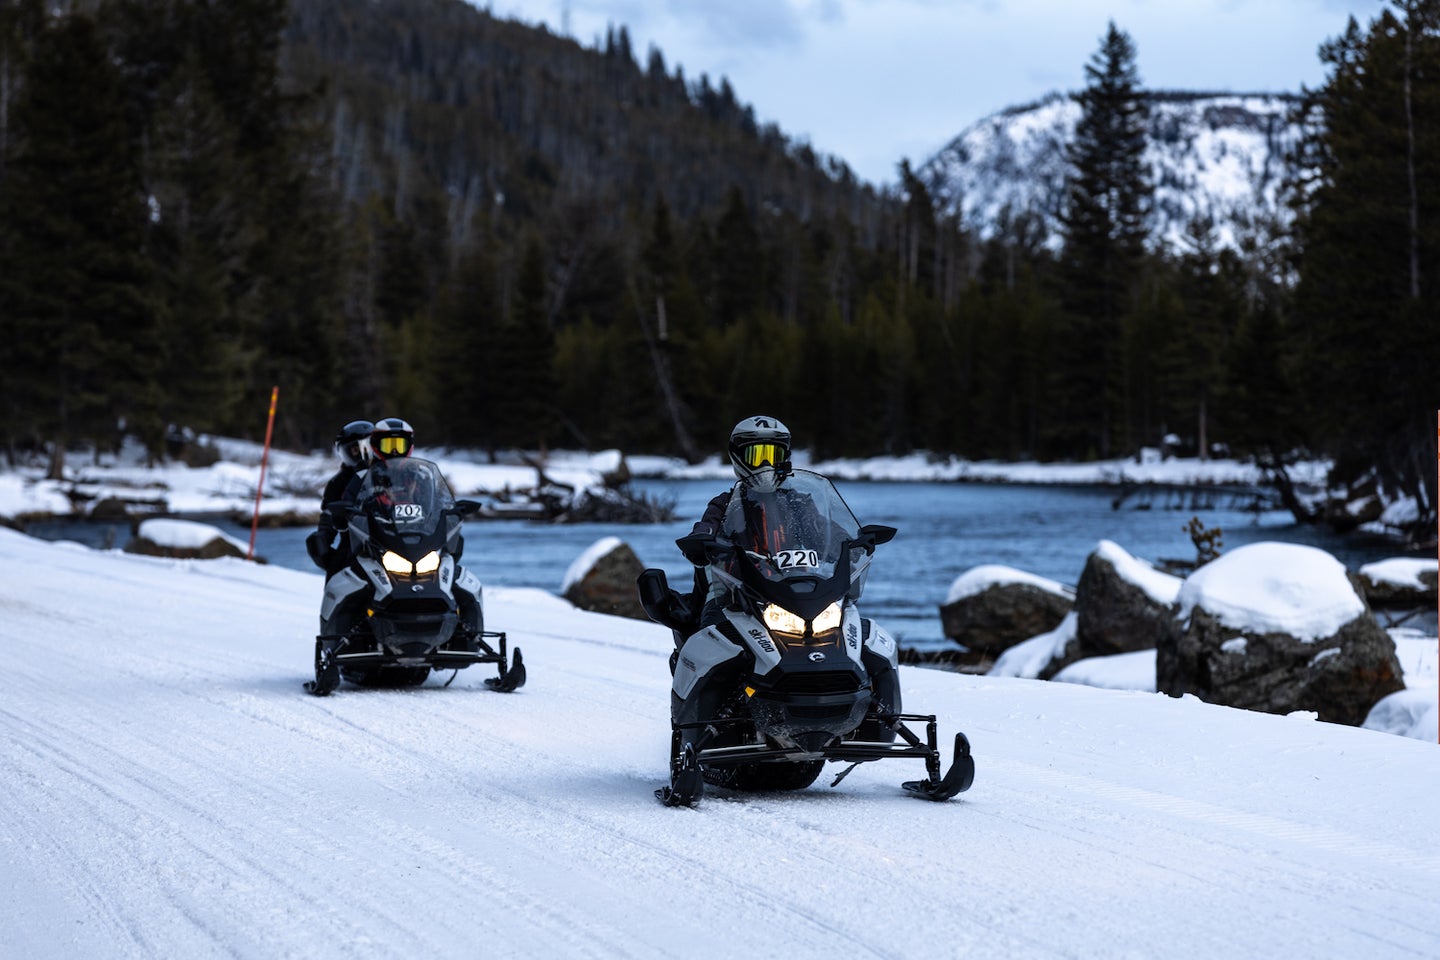 Two snowmobiles ride on the snow next to a river with a mountain and forest in the background